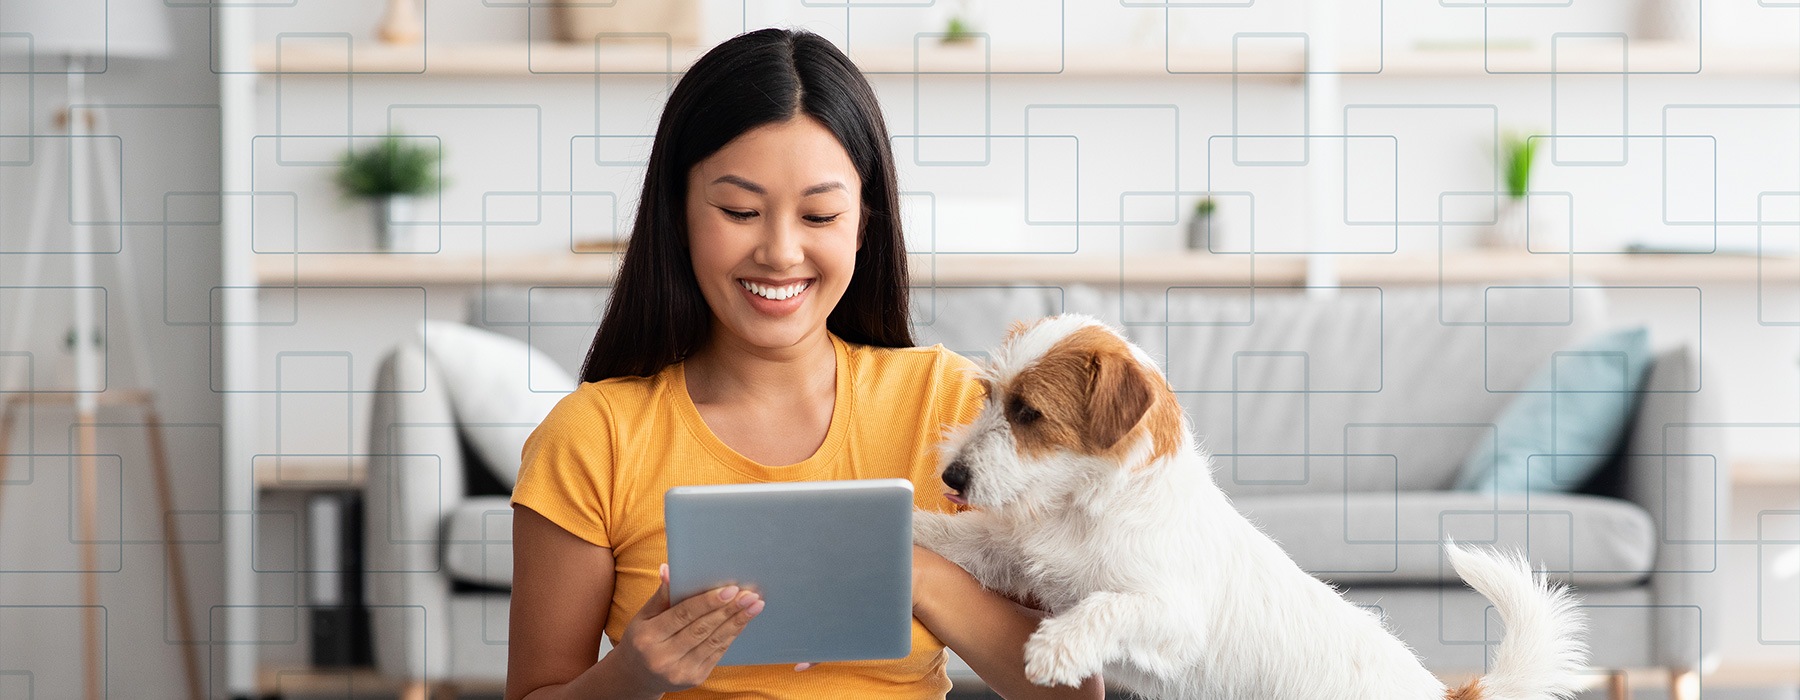 lifestyle image of a woman smiling, working on a smart device beside her pet